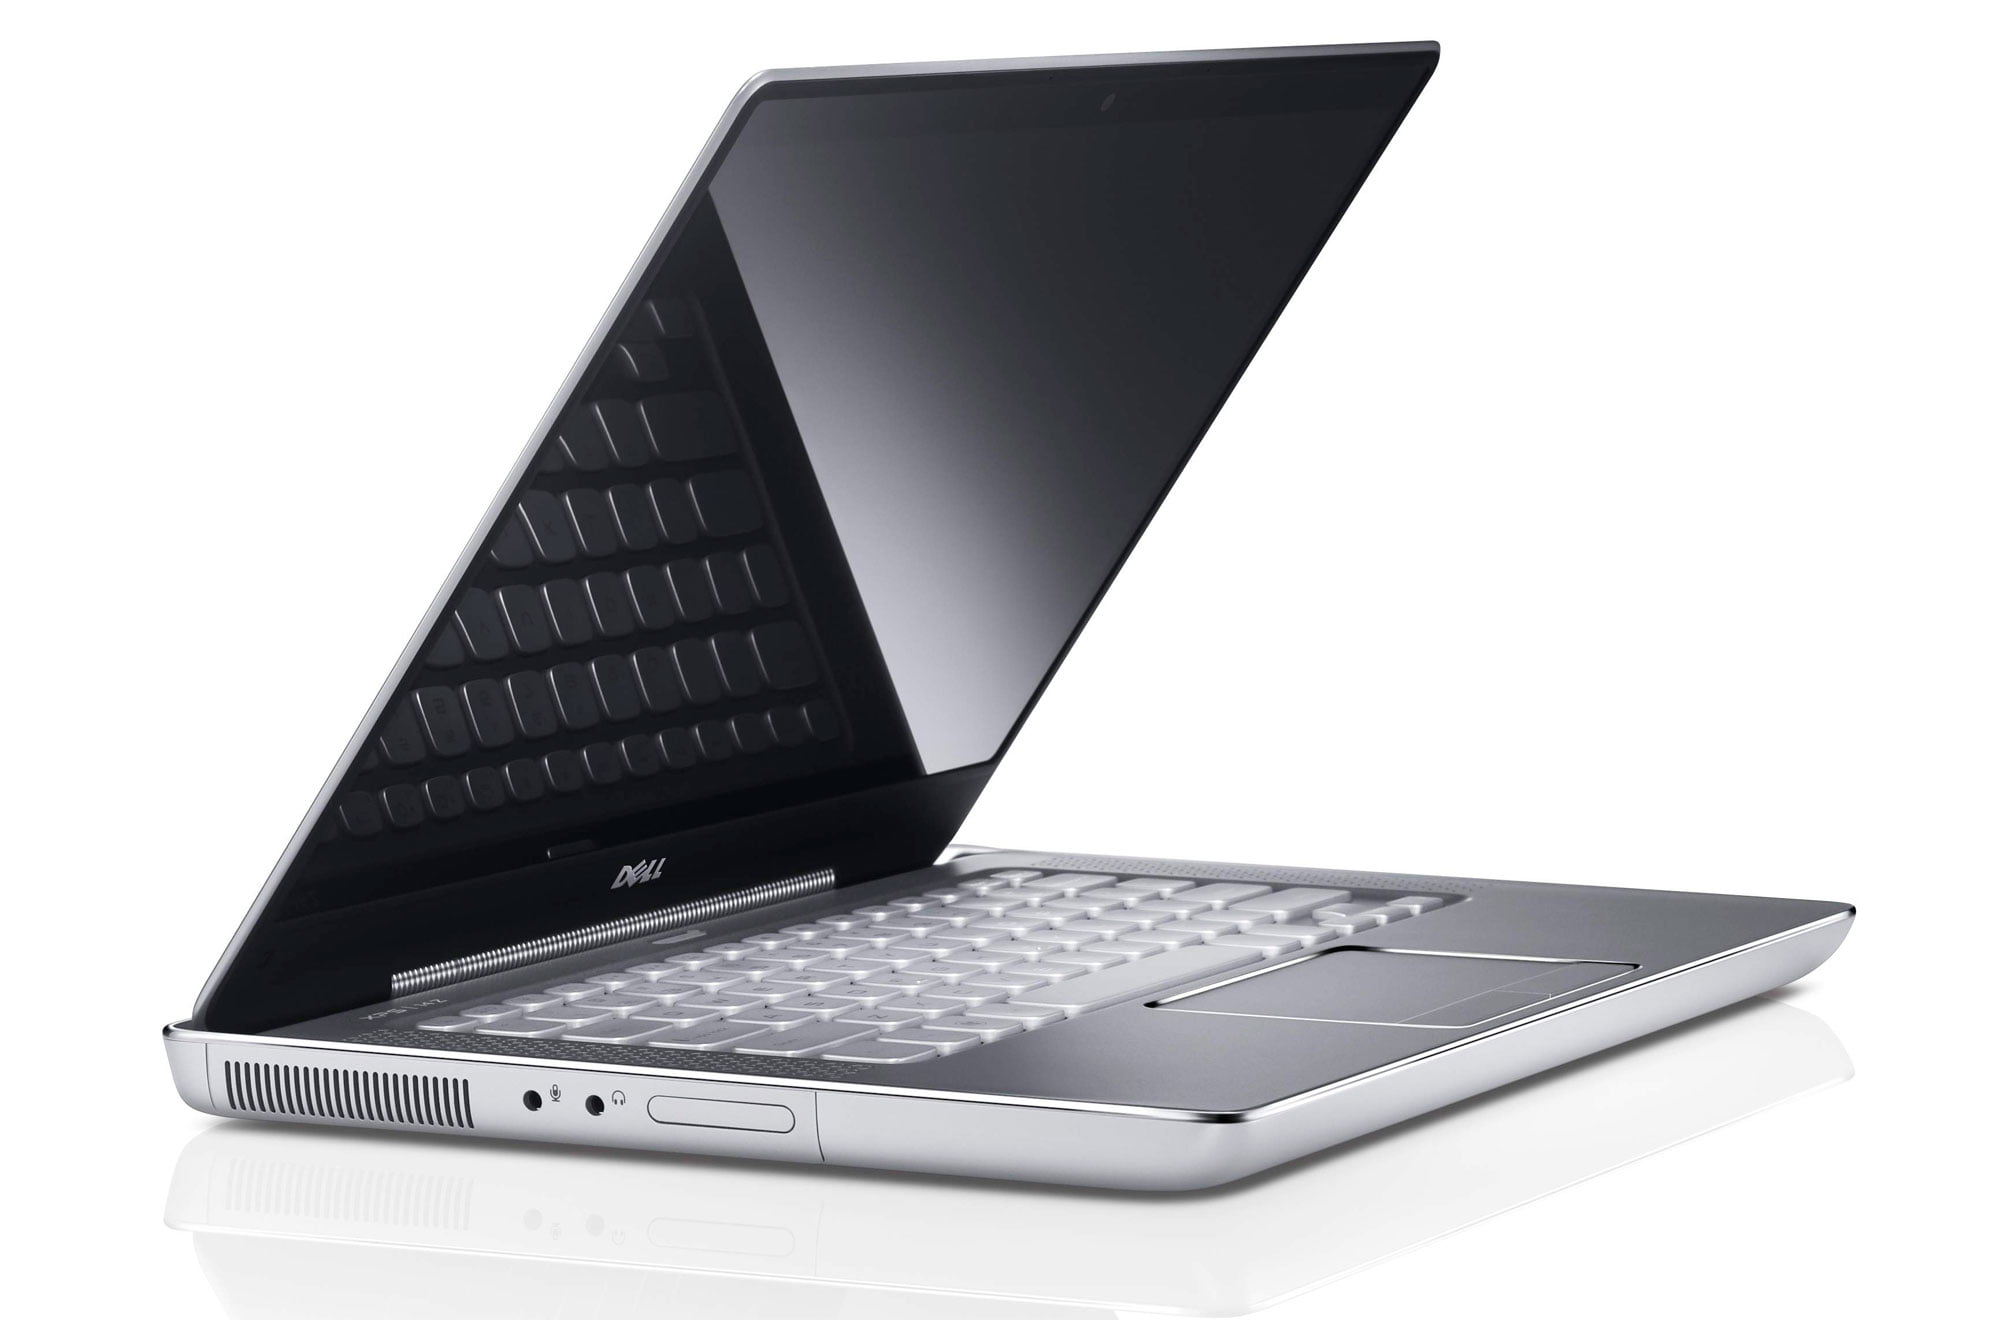  Dell XPS 14 si XPS 15 – introduse in mod oficial